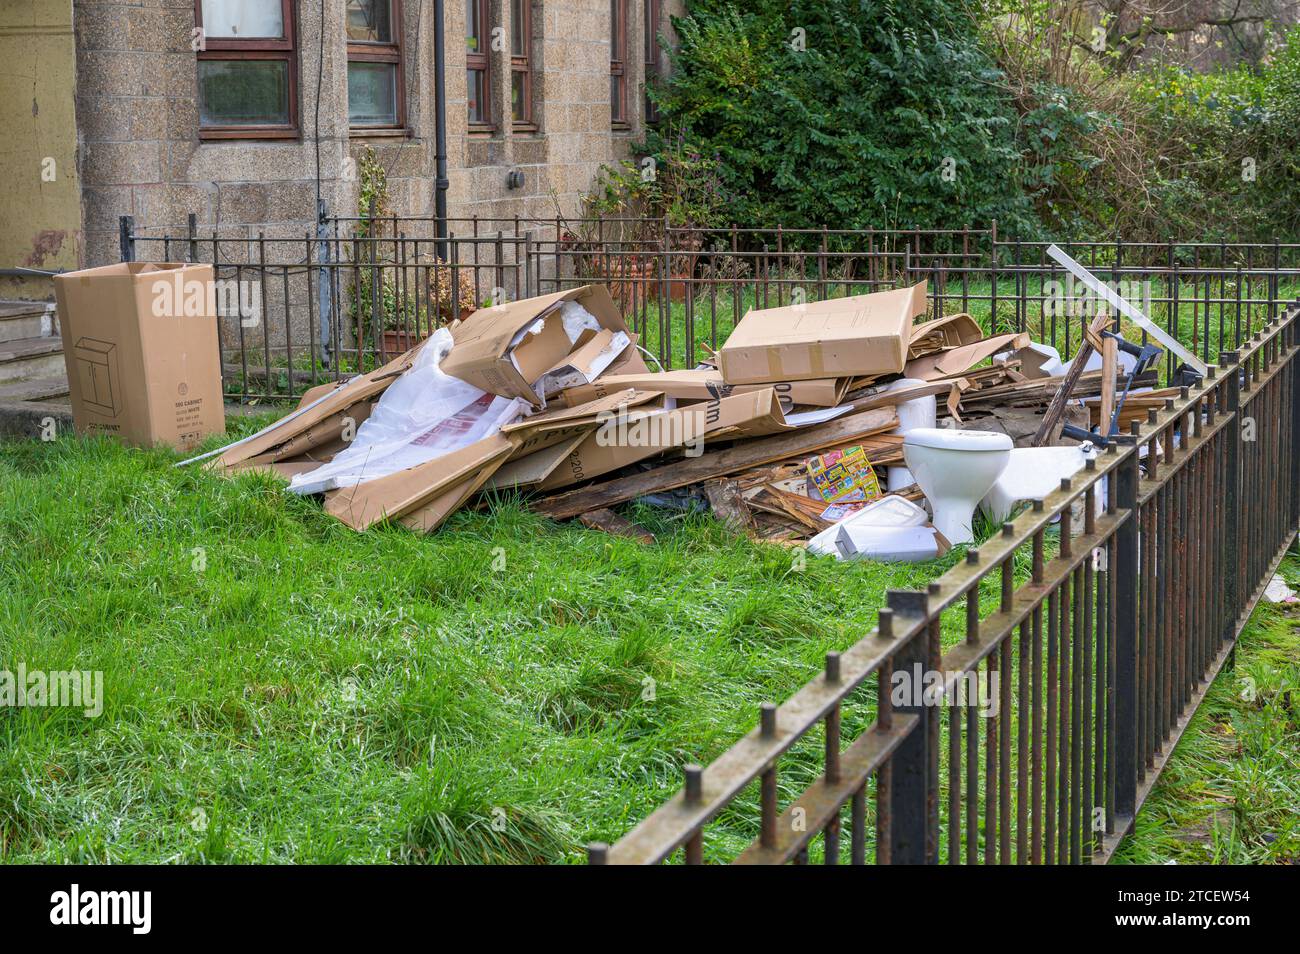 Packaging and old bathroom items waiting to be collected from a garden during house renovations, Glasgow, Scotland, UK, Europe Stock Photo